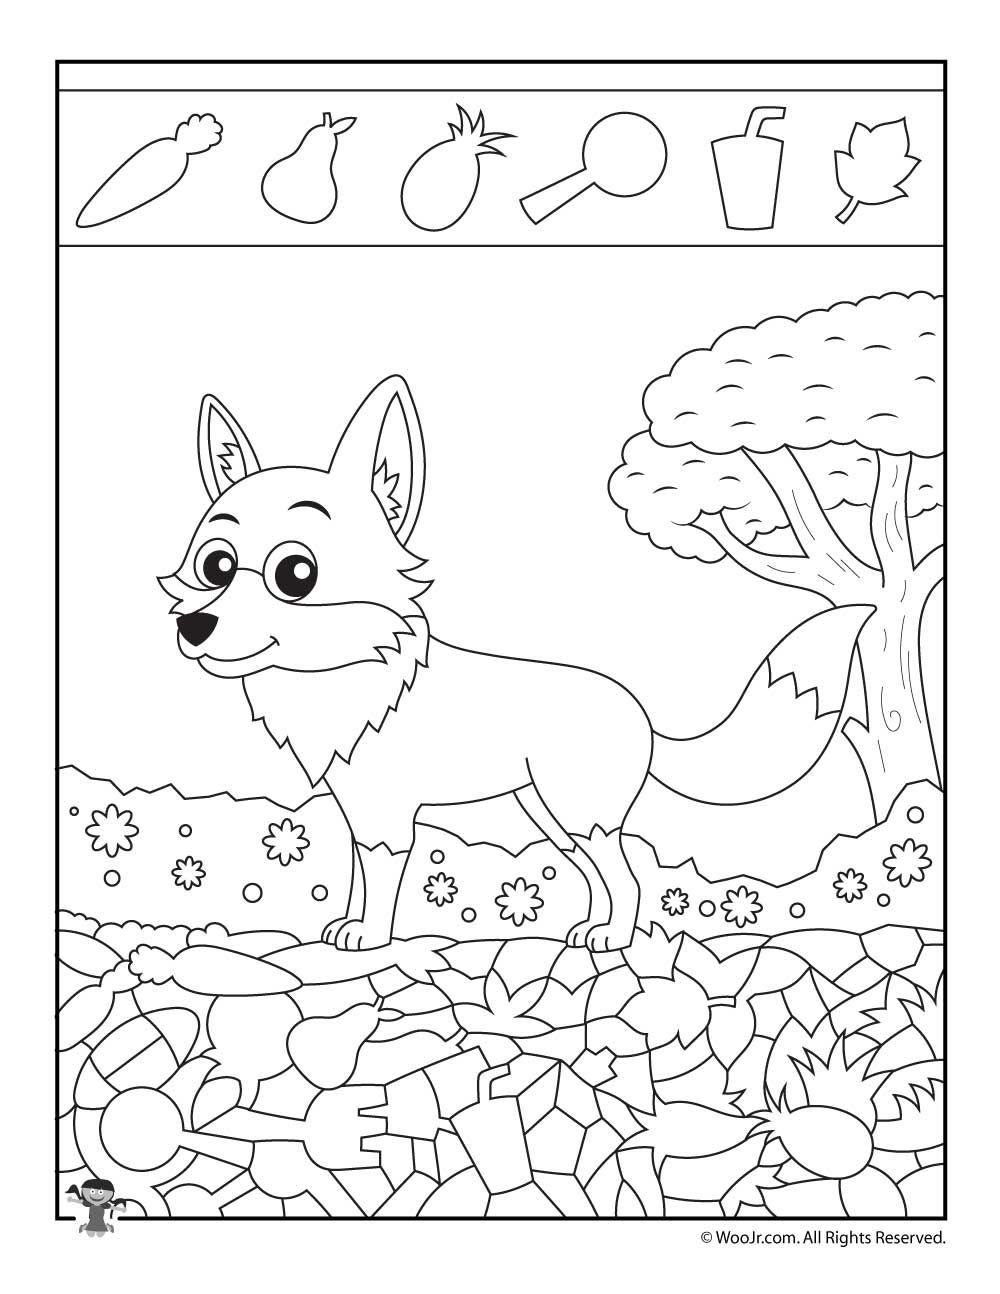 Easy Hidden Pictures With Animals Printable Activity Pages Woo Jr 